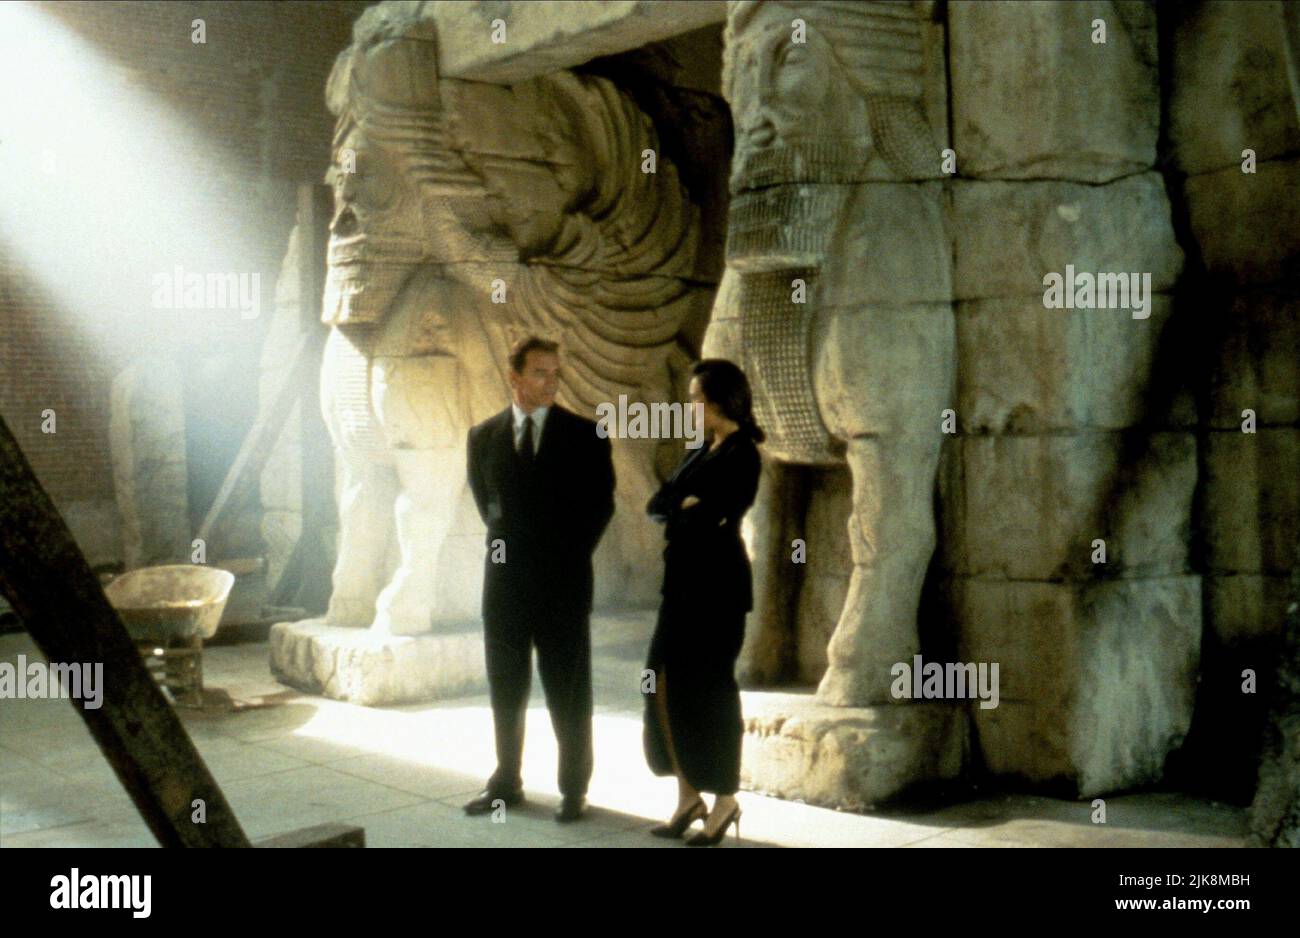 Arnold Schwarzenegger & Tia Carrere Film: True Lies (USA 1994) Characters:  Harry Tasker & Juno Skinner Director: James Cameron 13 July 1994  **WARNING** This Photograph is for editorial use only and is